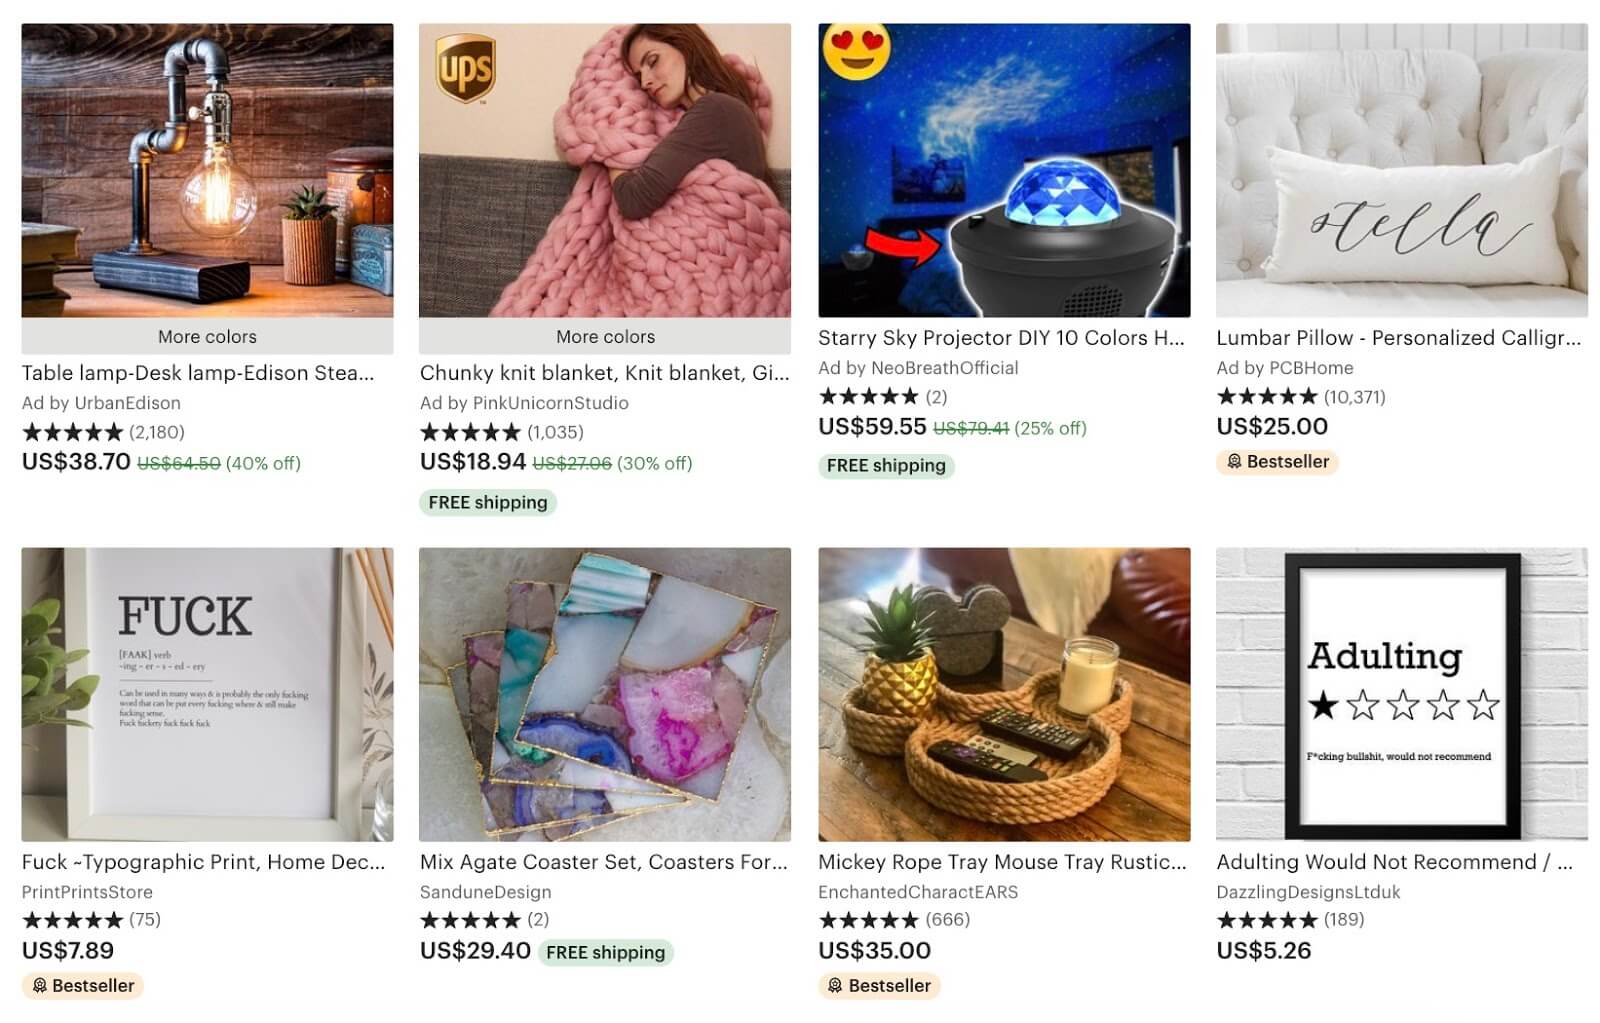 Selling home decor products on Etsy